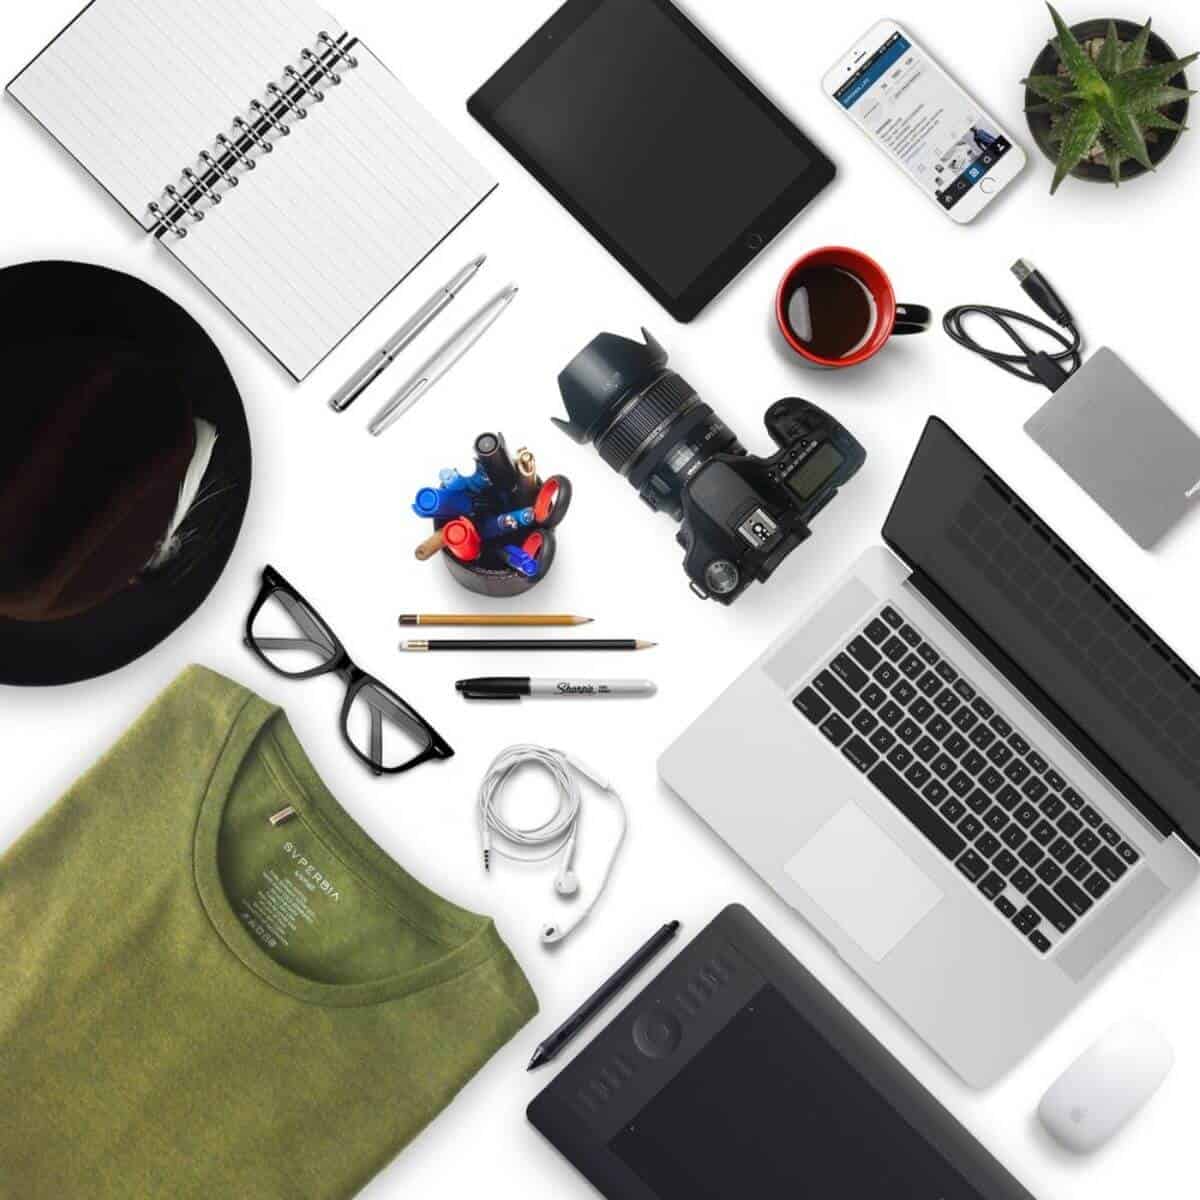 Flatlay of a photographers equipment and laptop.